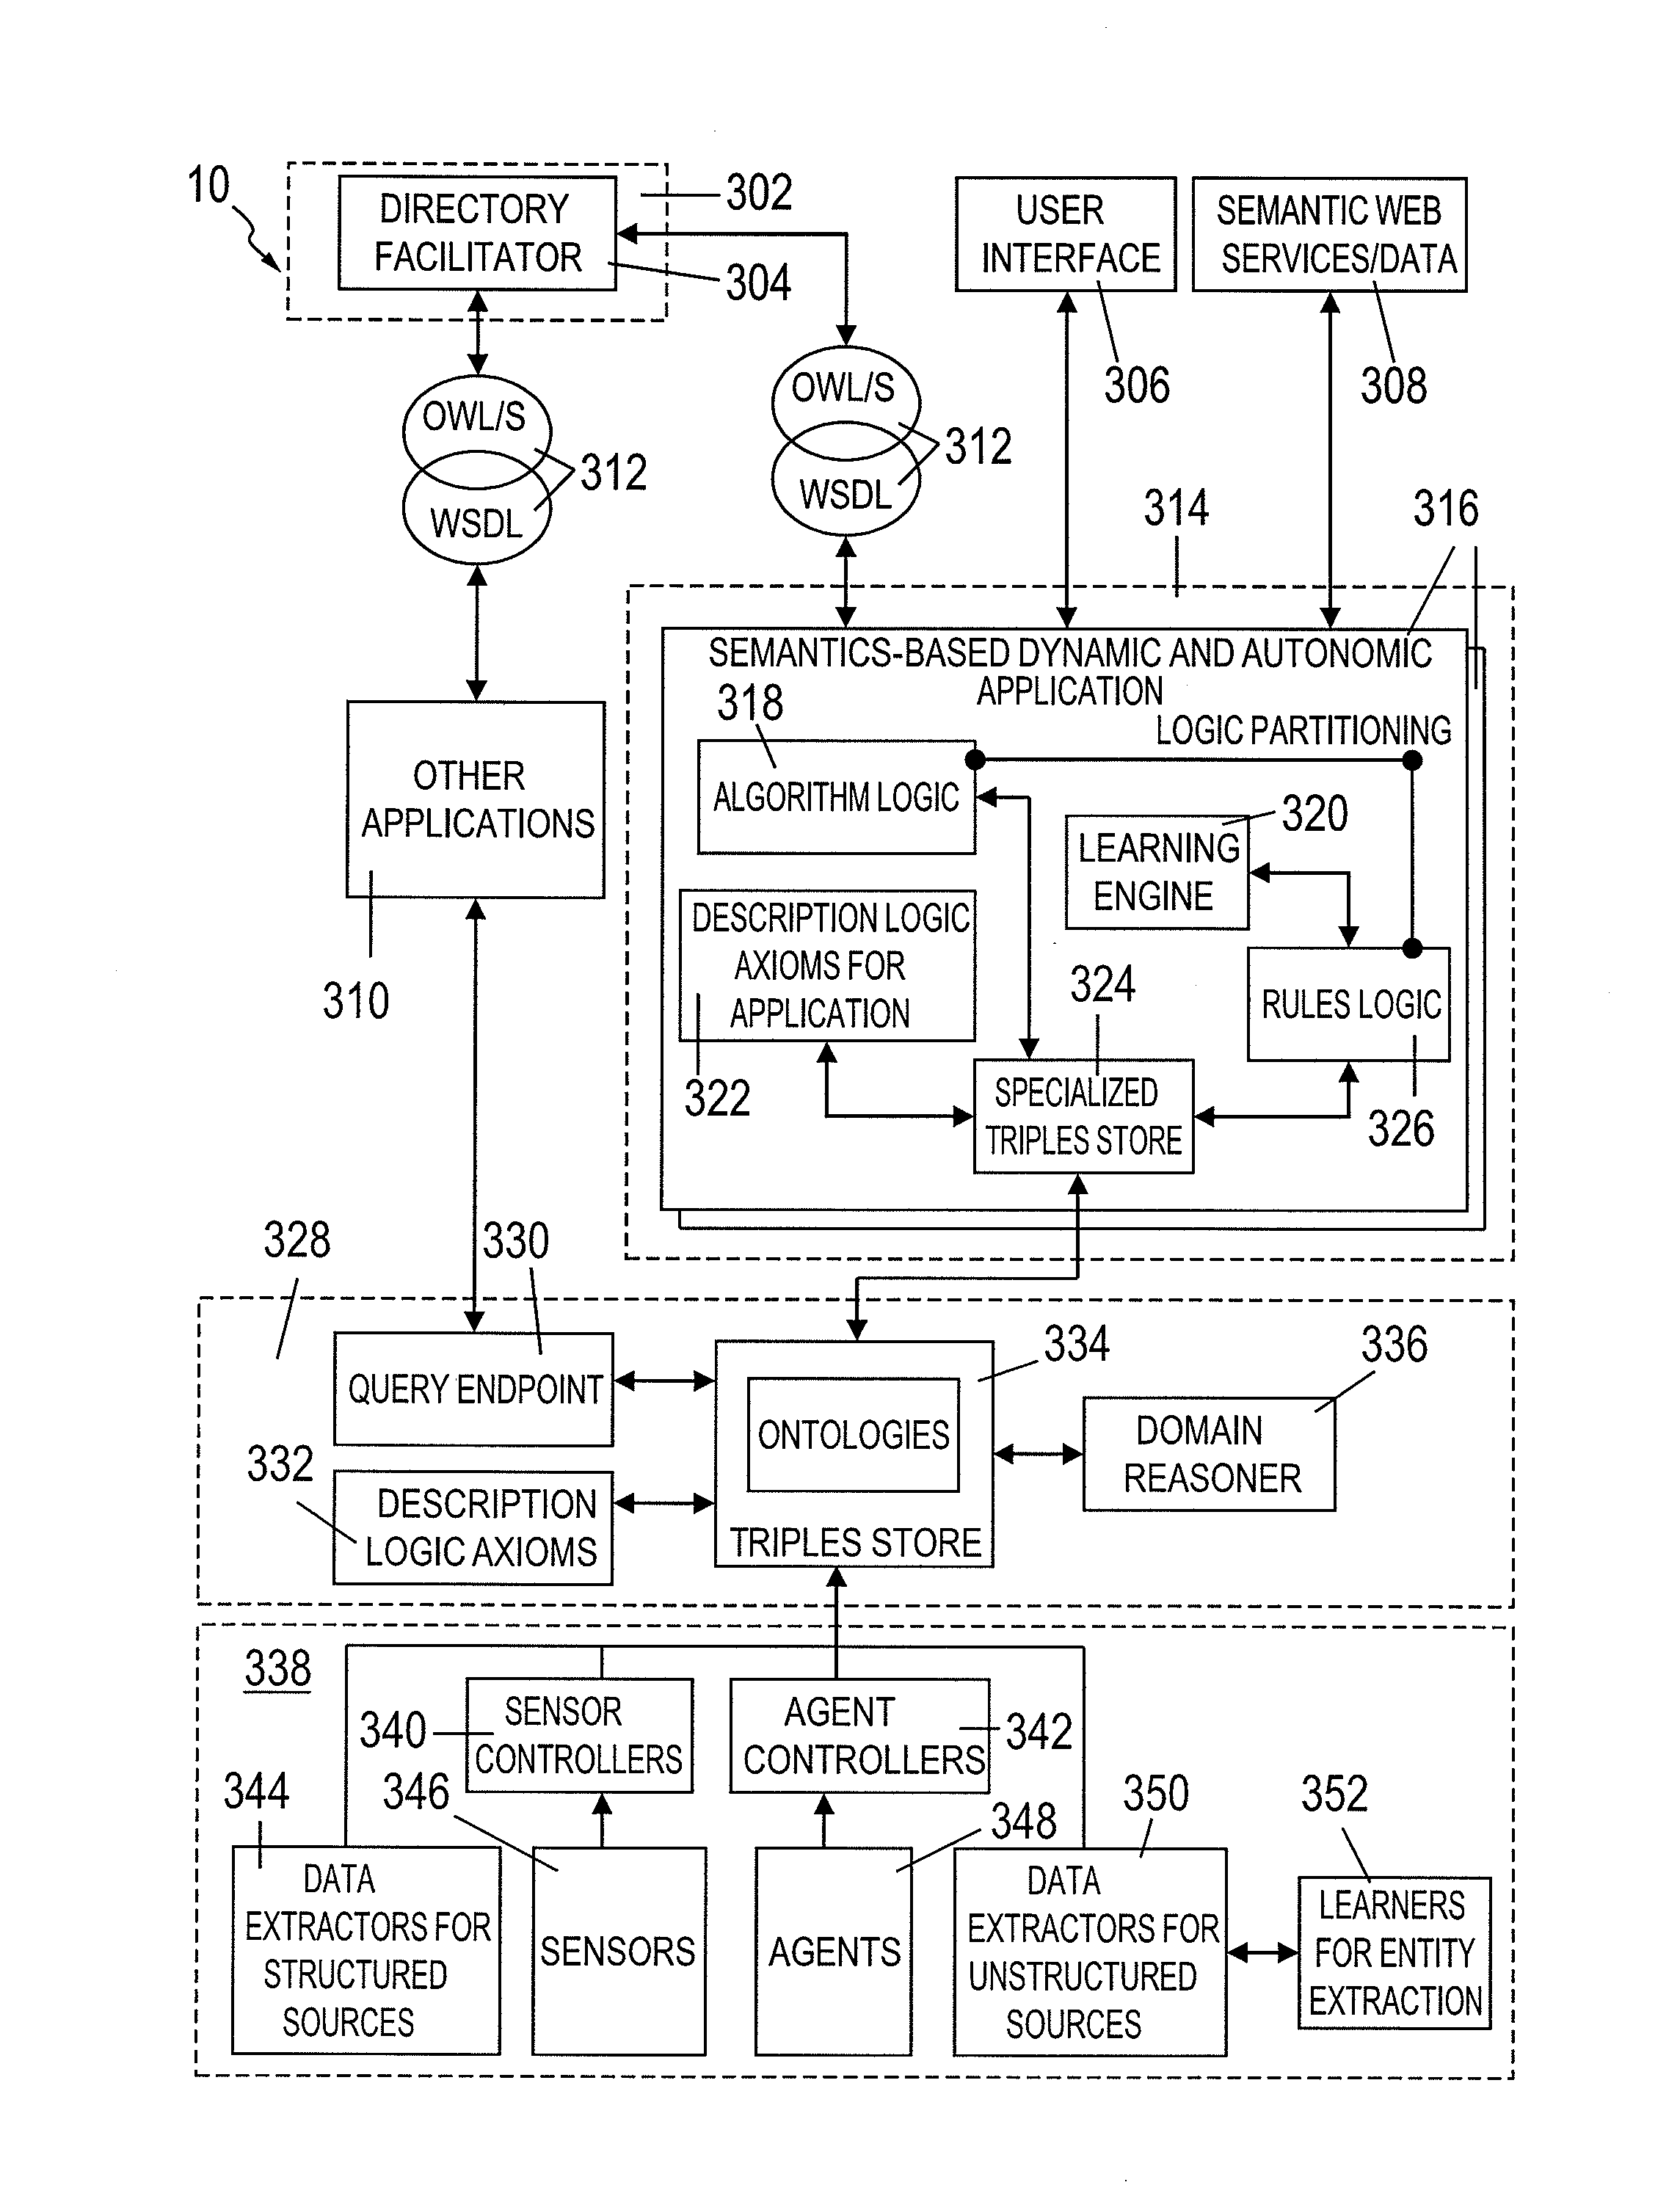 System for supporting coordination of resources for events in an organization